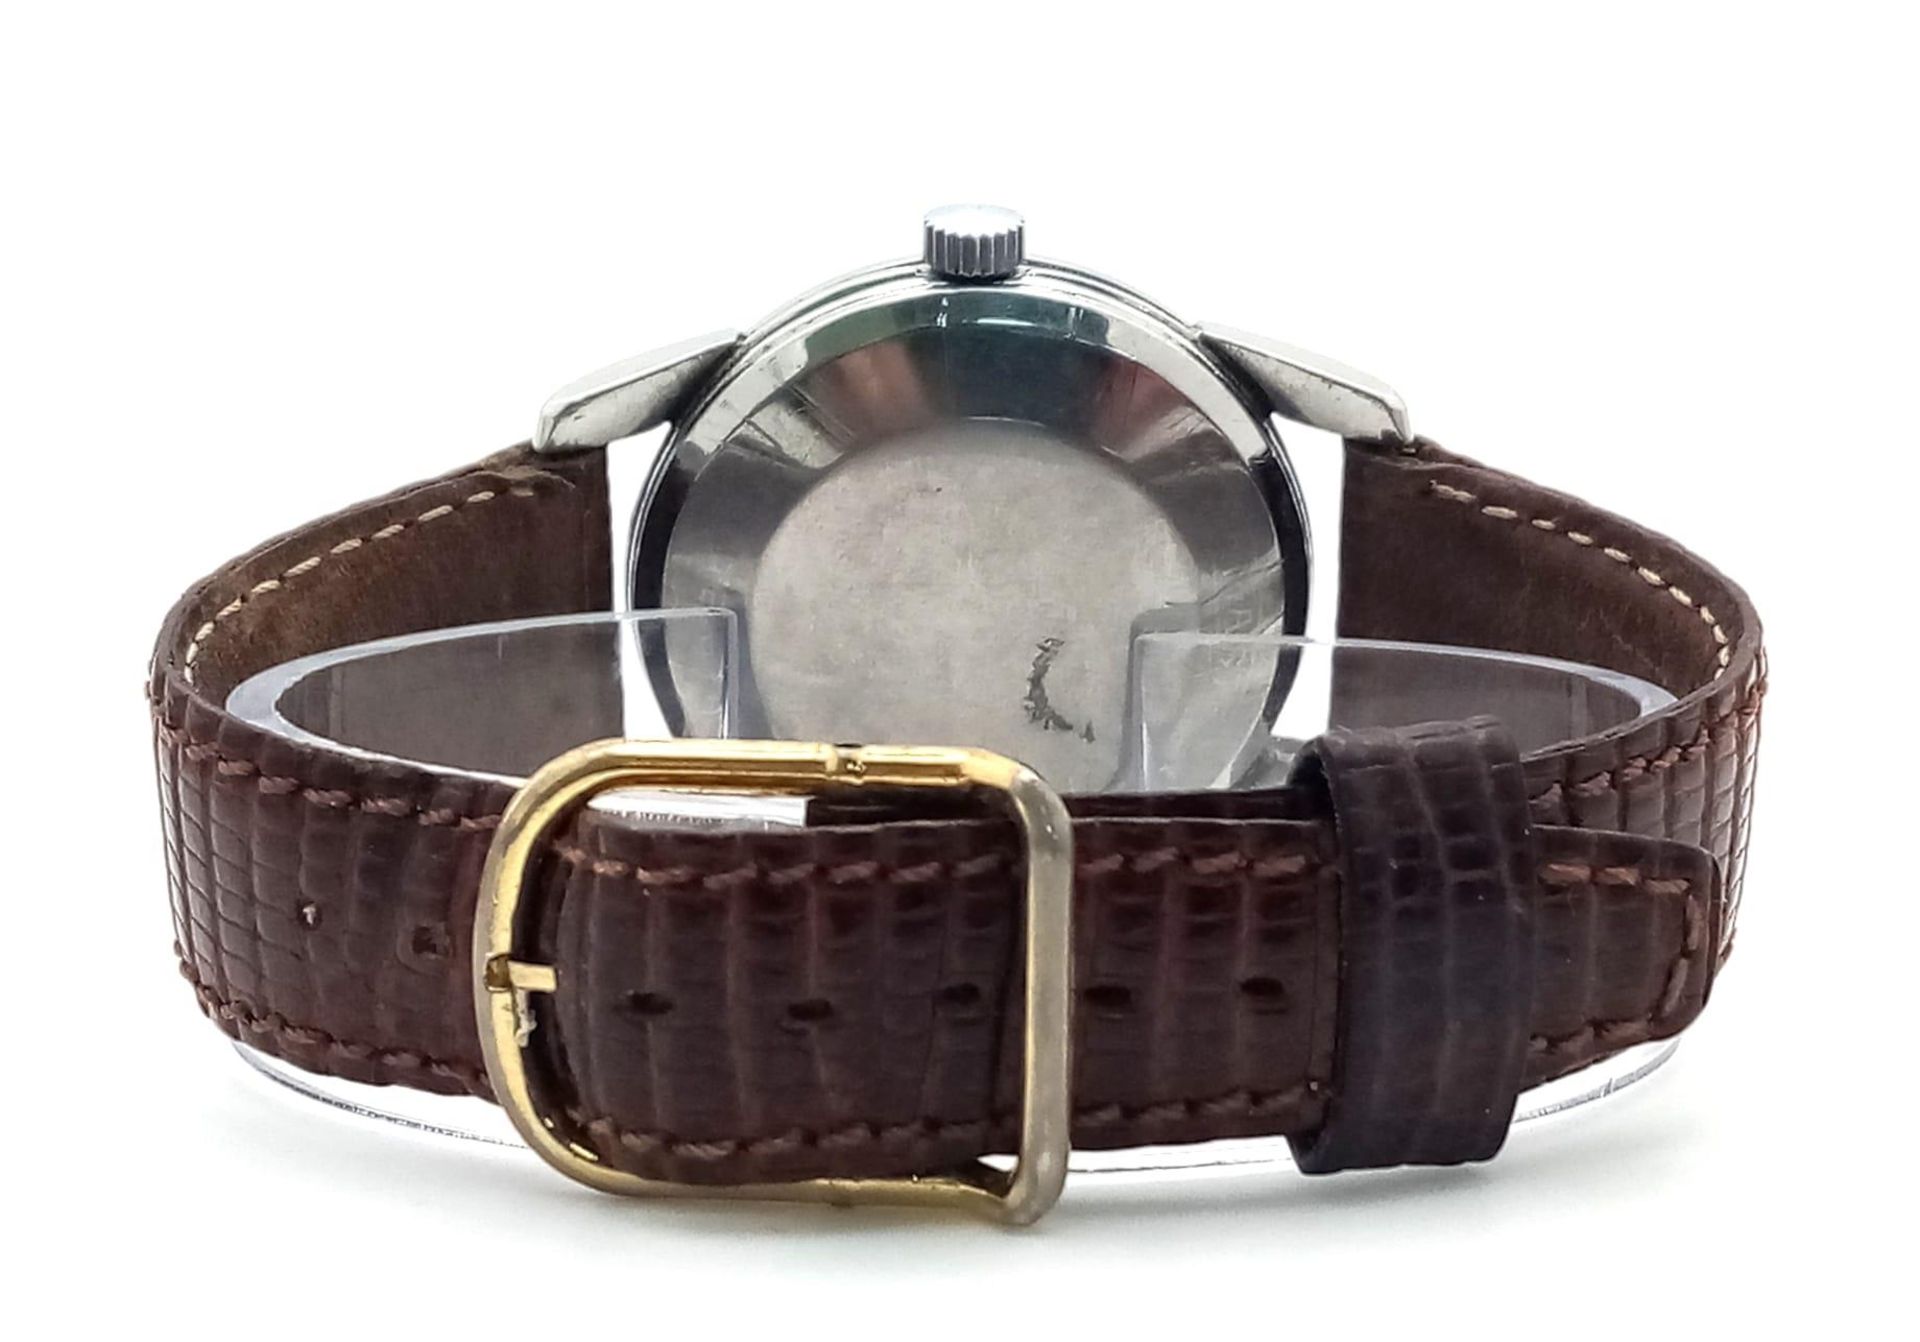 A Vintage Omega Seamaster Calendar Gents Watch. Brown leather strap. Stainless steel case - 33mm. - Image 7 of 8